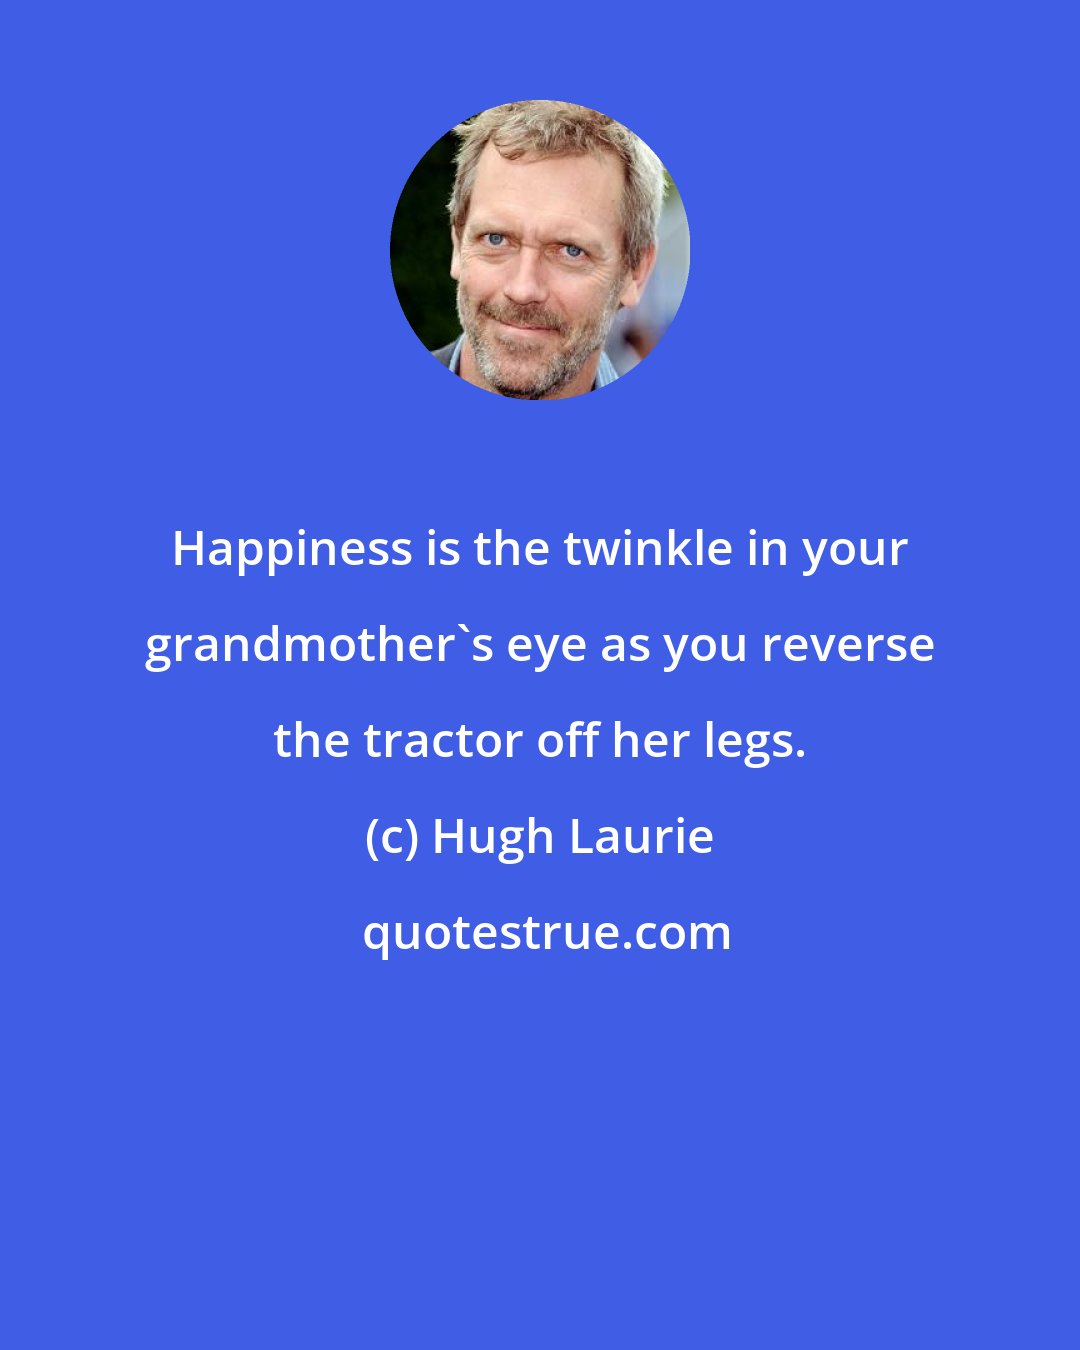 Hugh Laurie: Happiness is the twinkle in your grandmother's eye as you reverse the tractor off her legs.